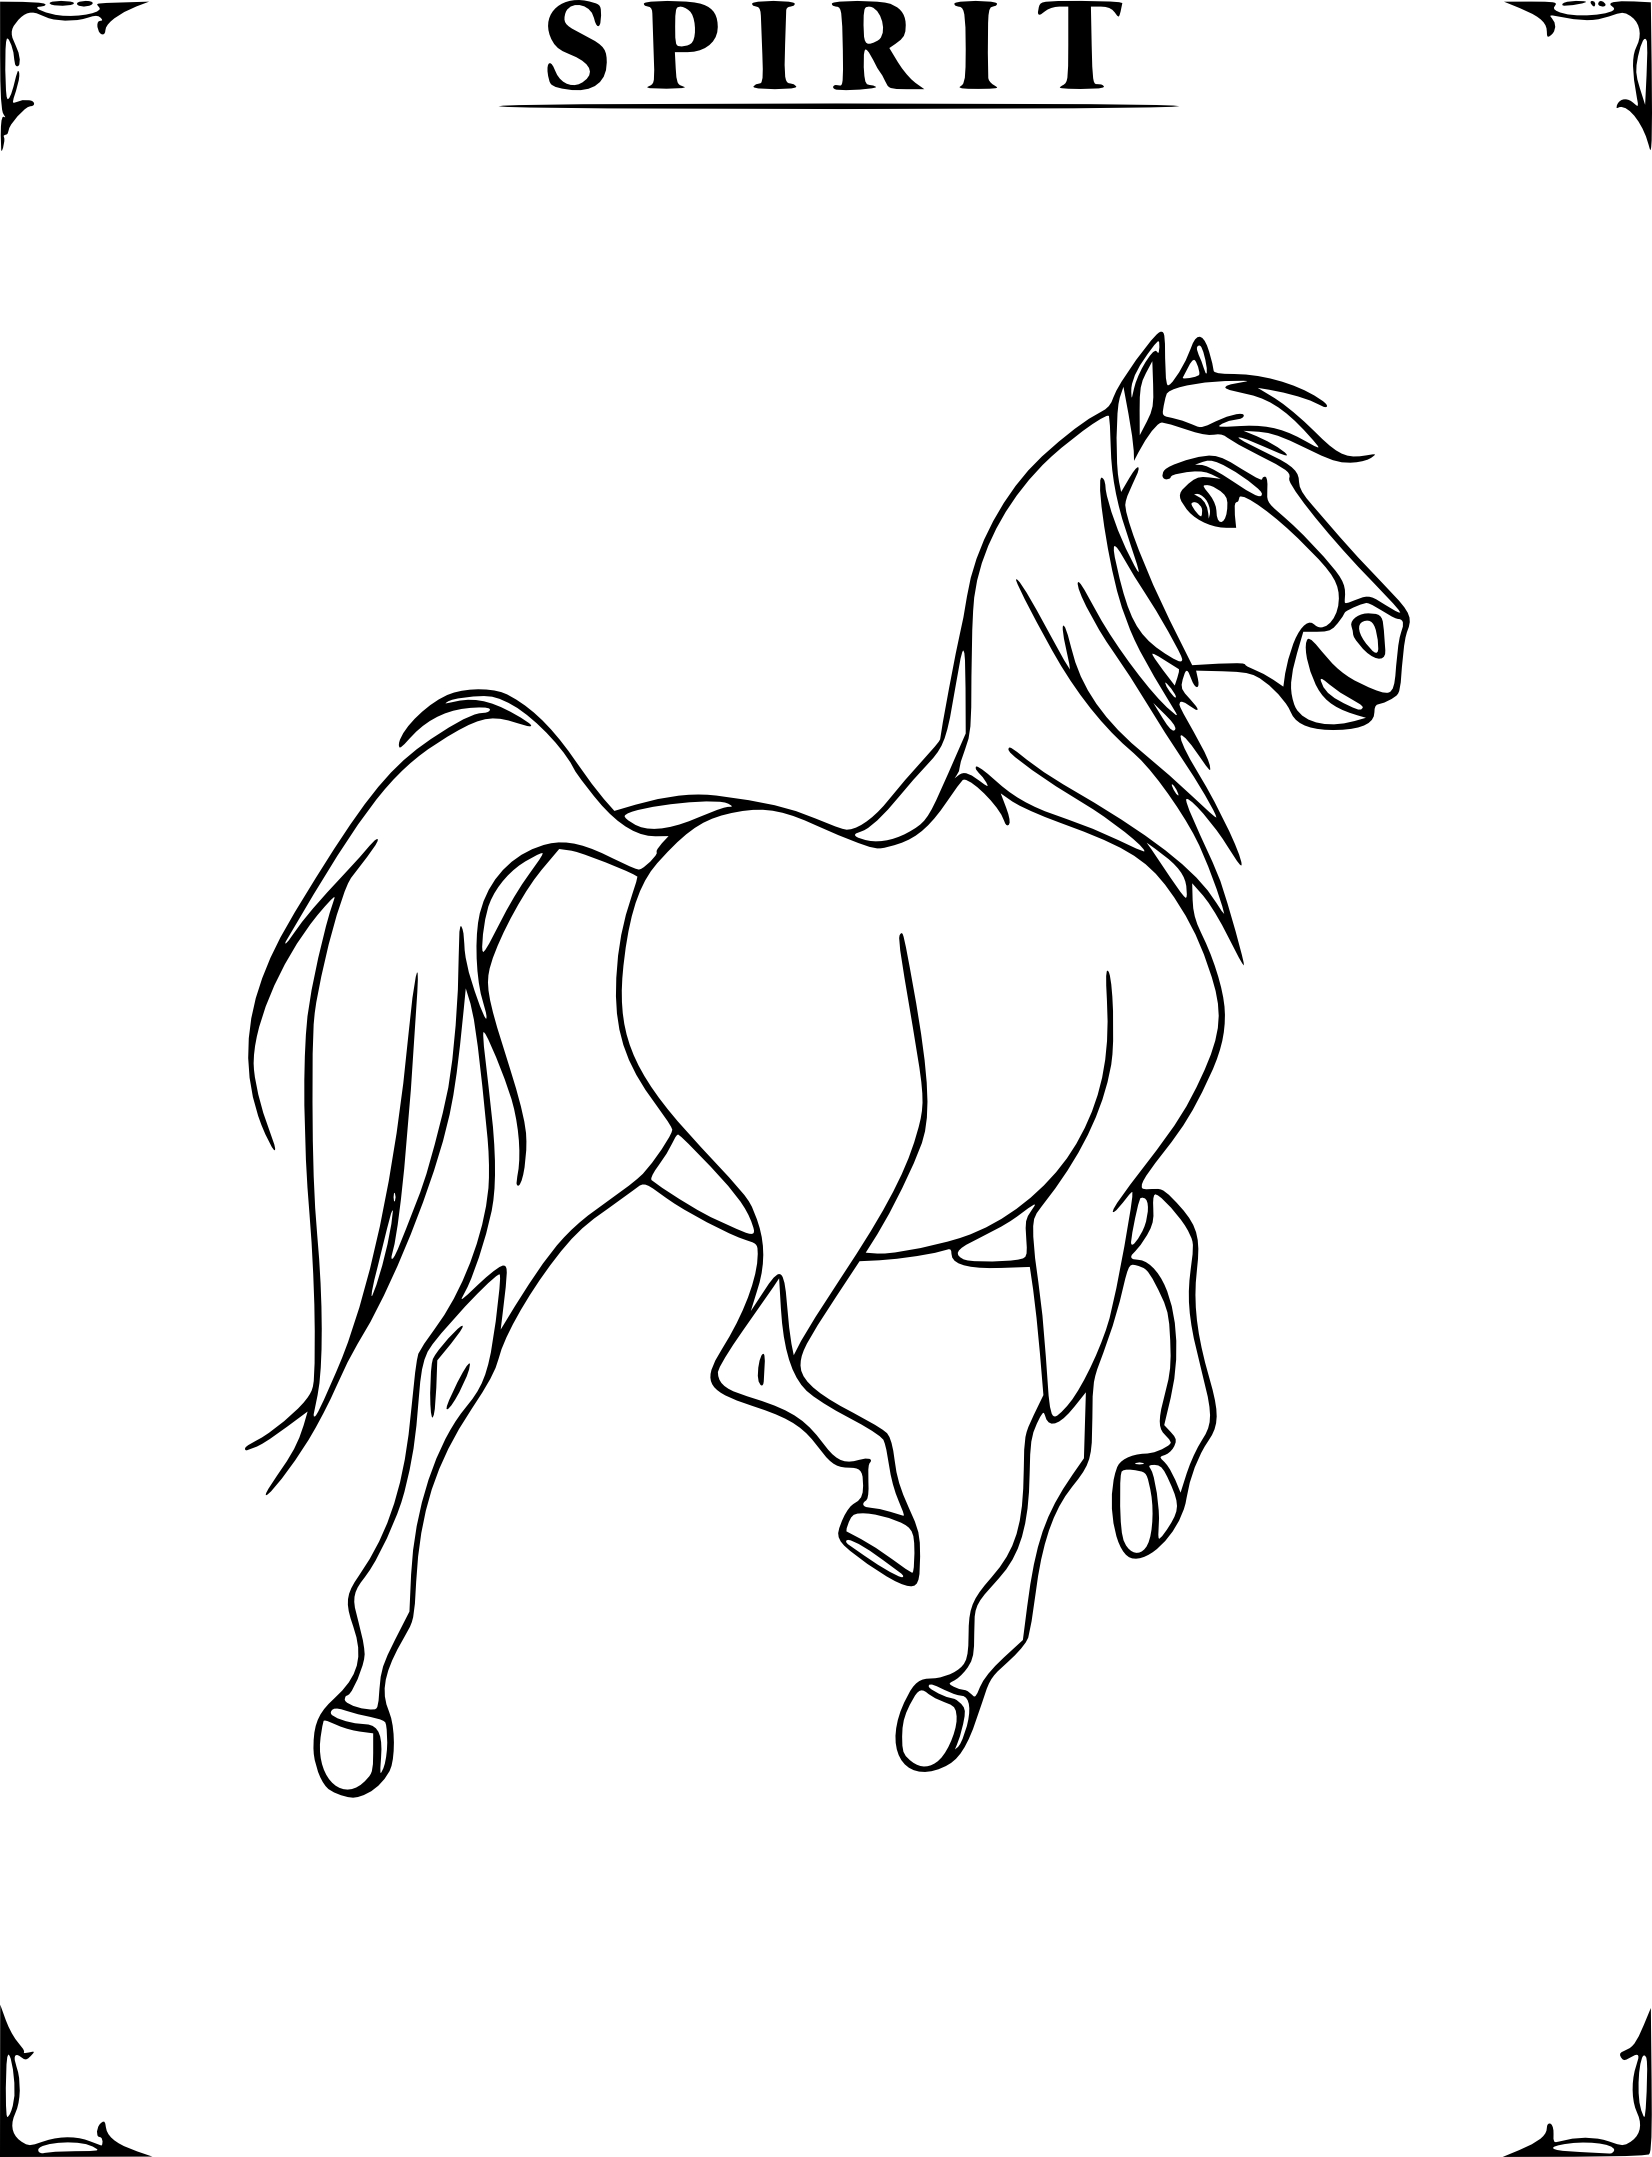 Spirit The Stallion Of The Plains coloring page